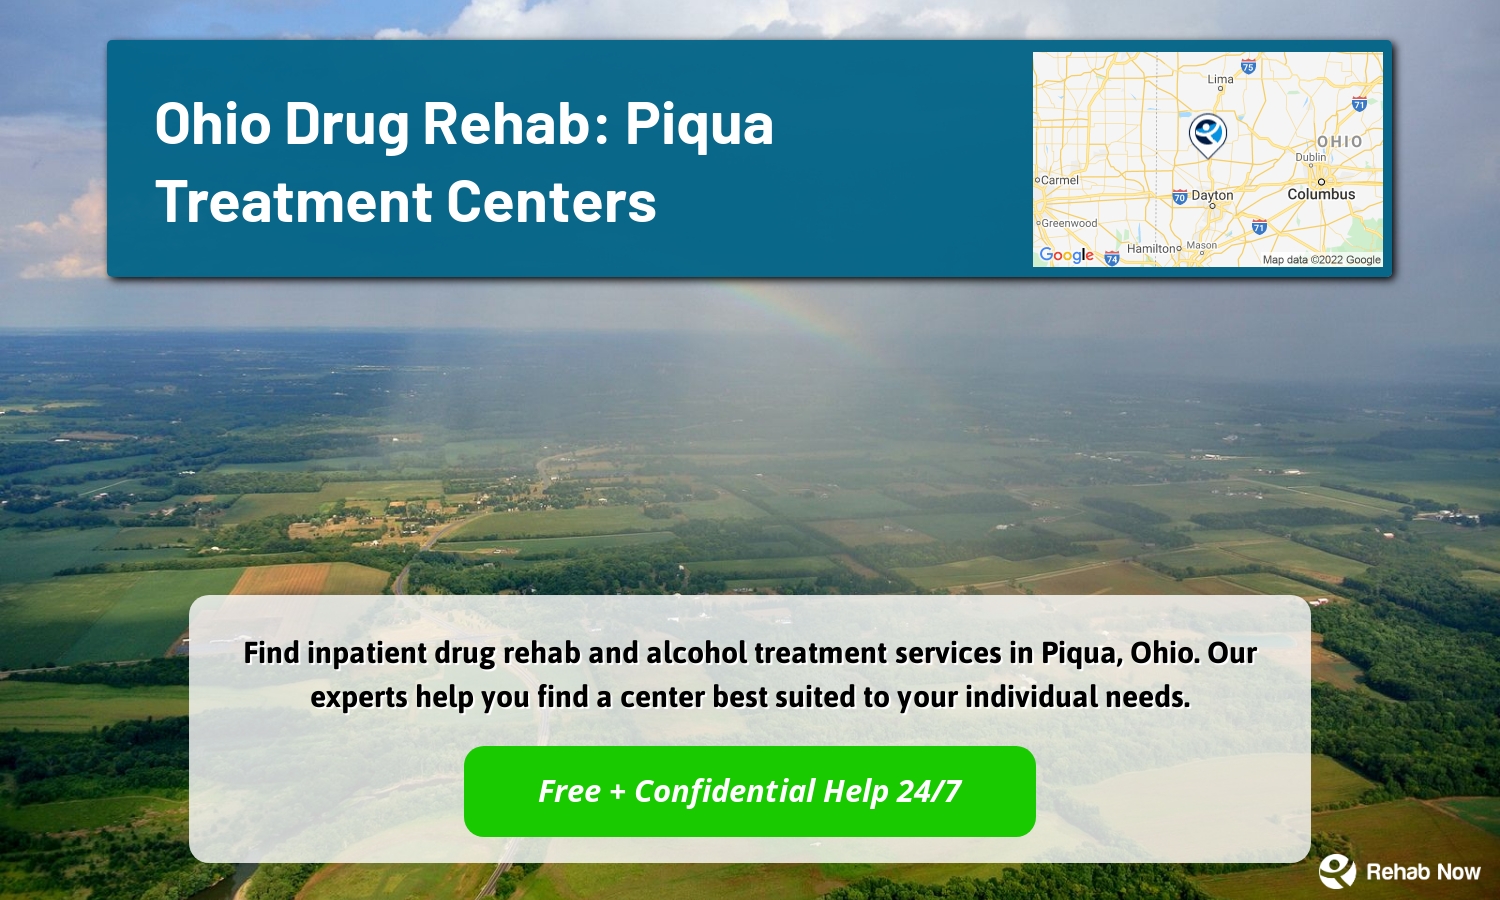 Find inpatient drug rehab and alcohol treatment services in Piqua, Ohio. Our experts help you find a center best suited to your individual needs.